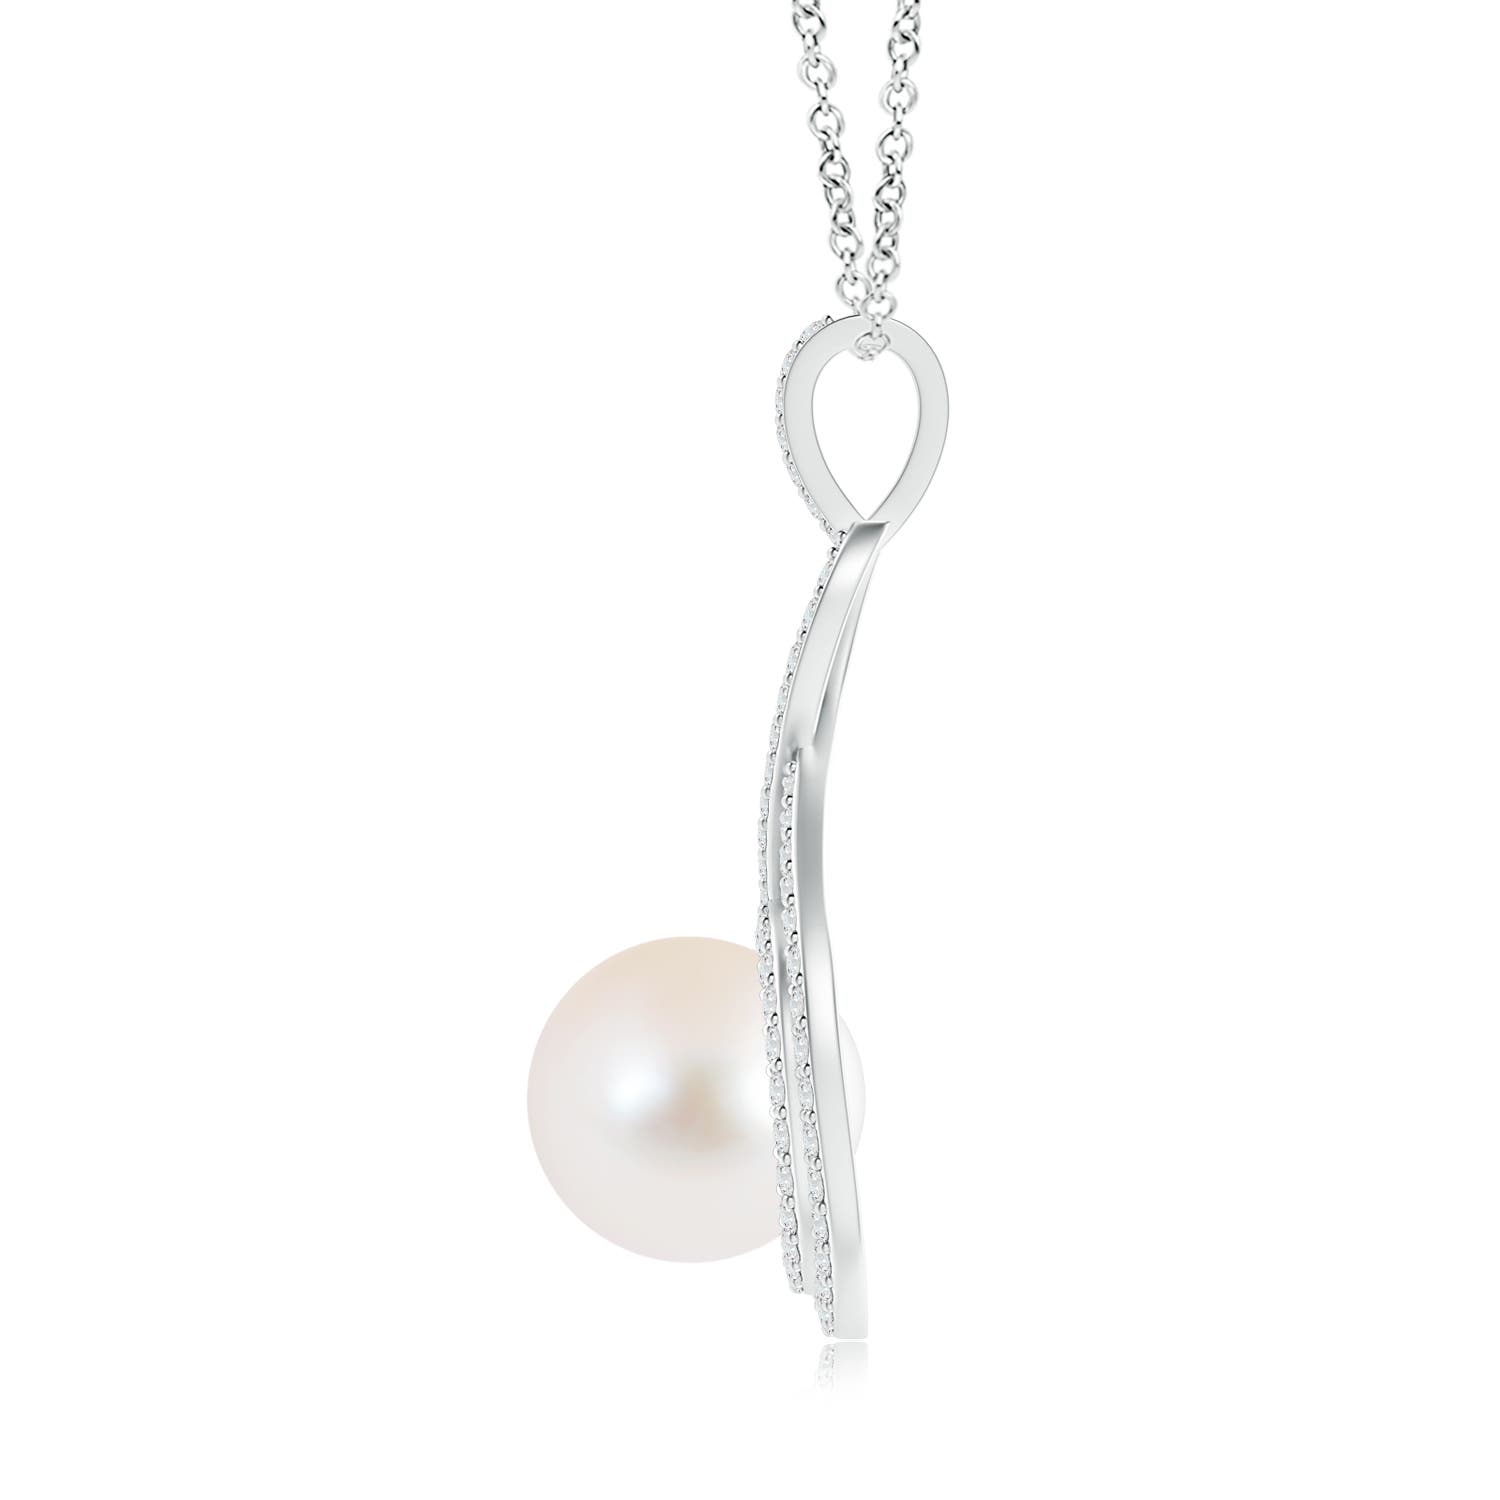 AAA - Freshwater Cultured Pearl / 7.79 CT / 14 KT White Gold